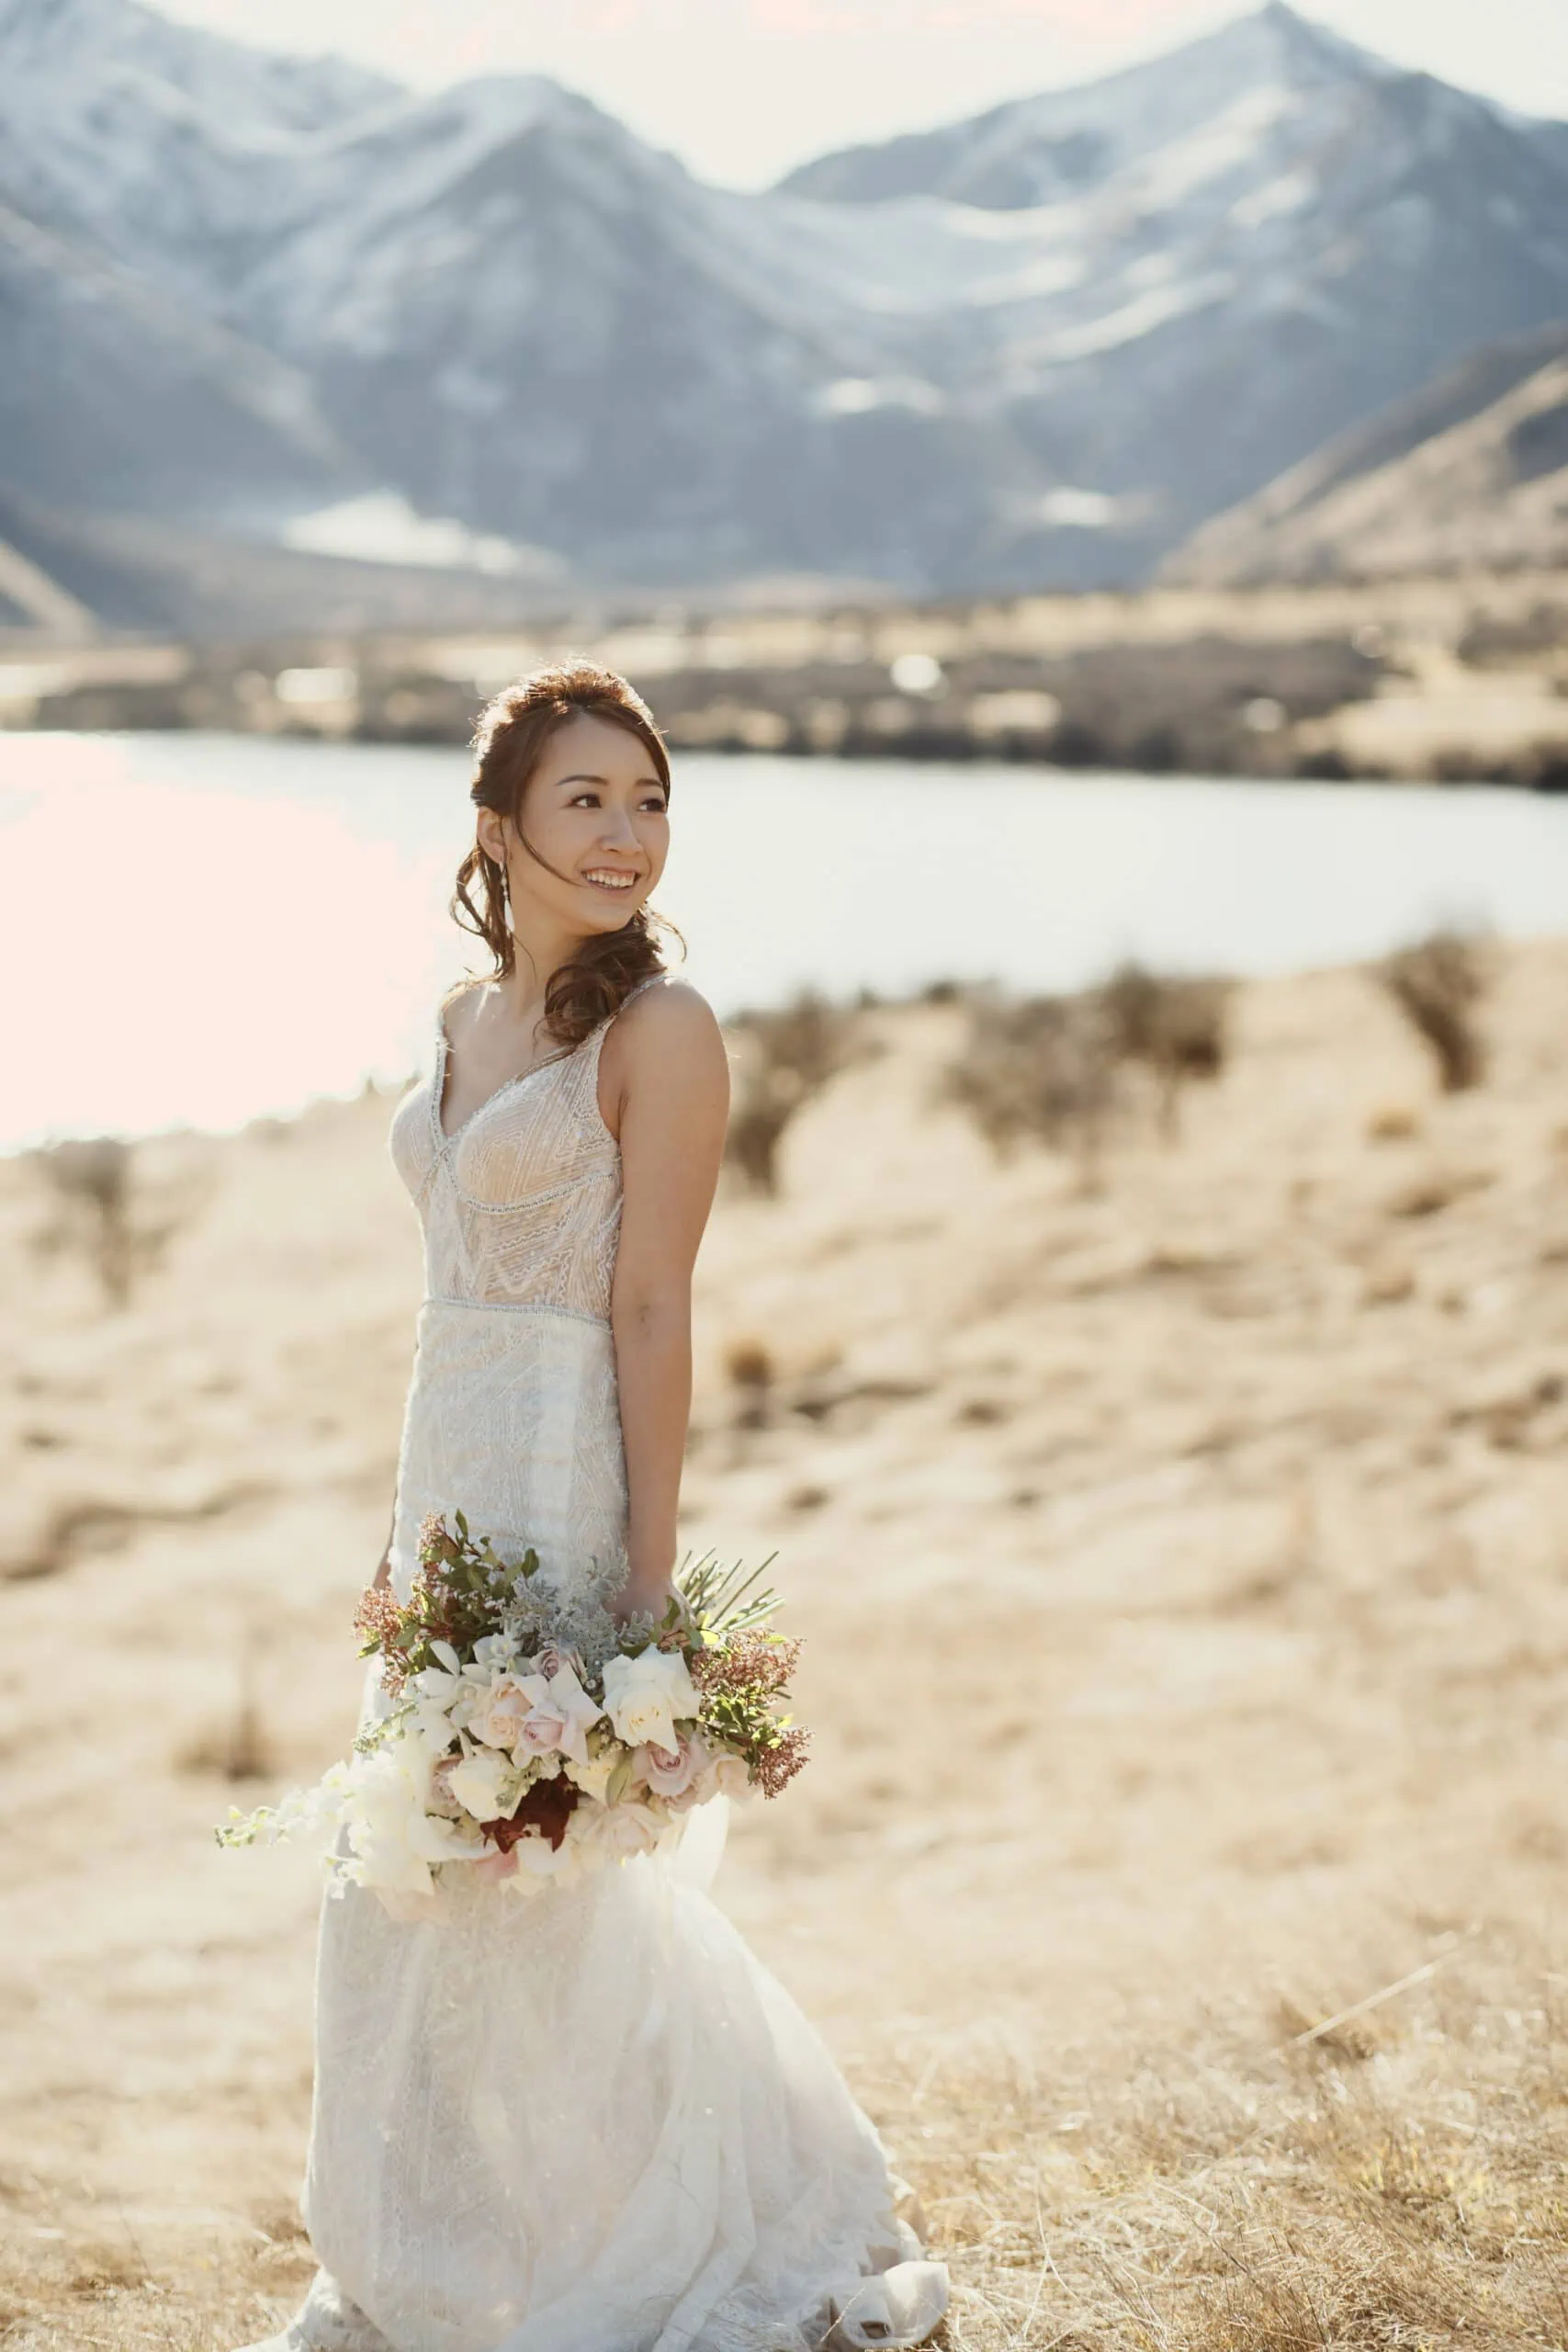 Stephanie and Carven's elopement at The Remarkables, with a bride standing in a field with mountains in the background.